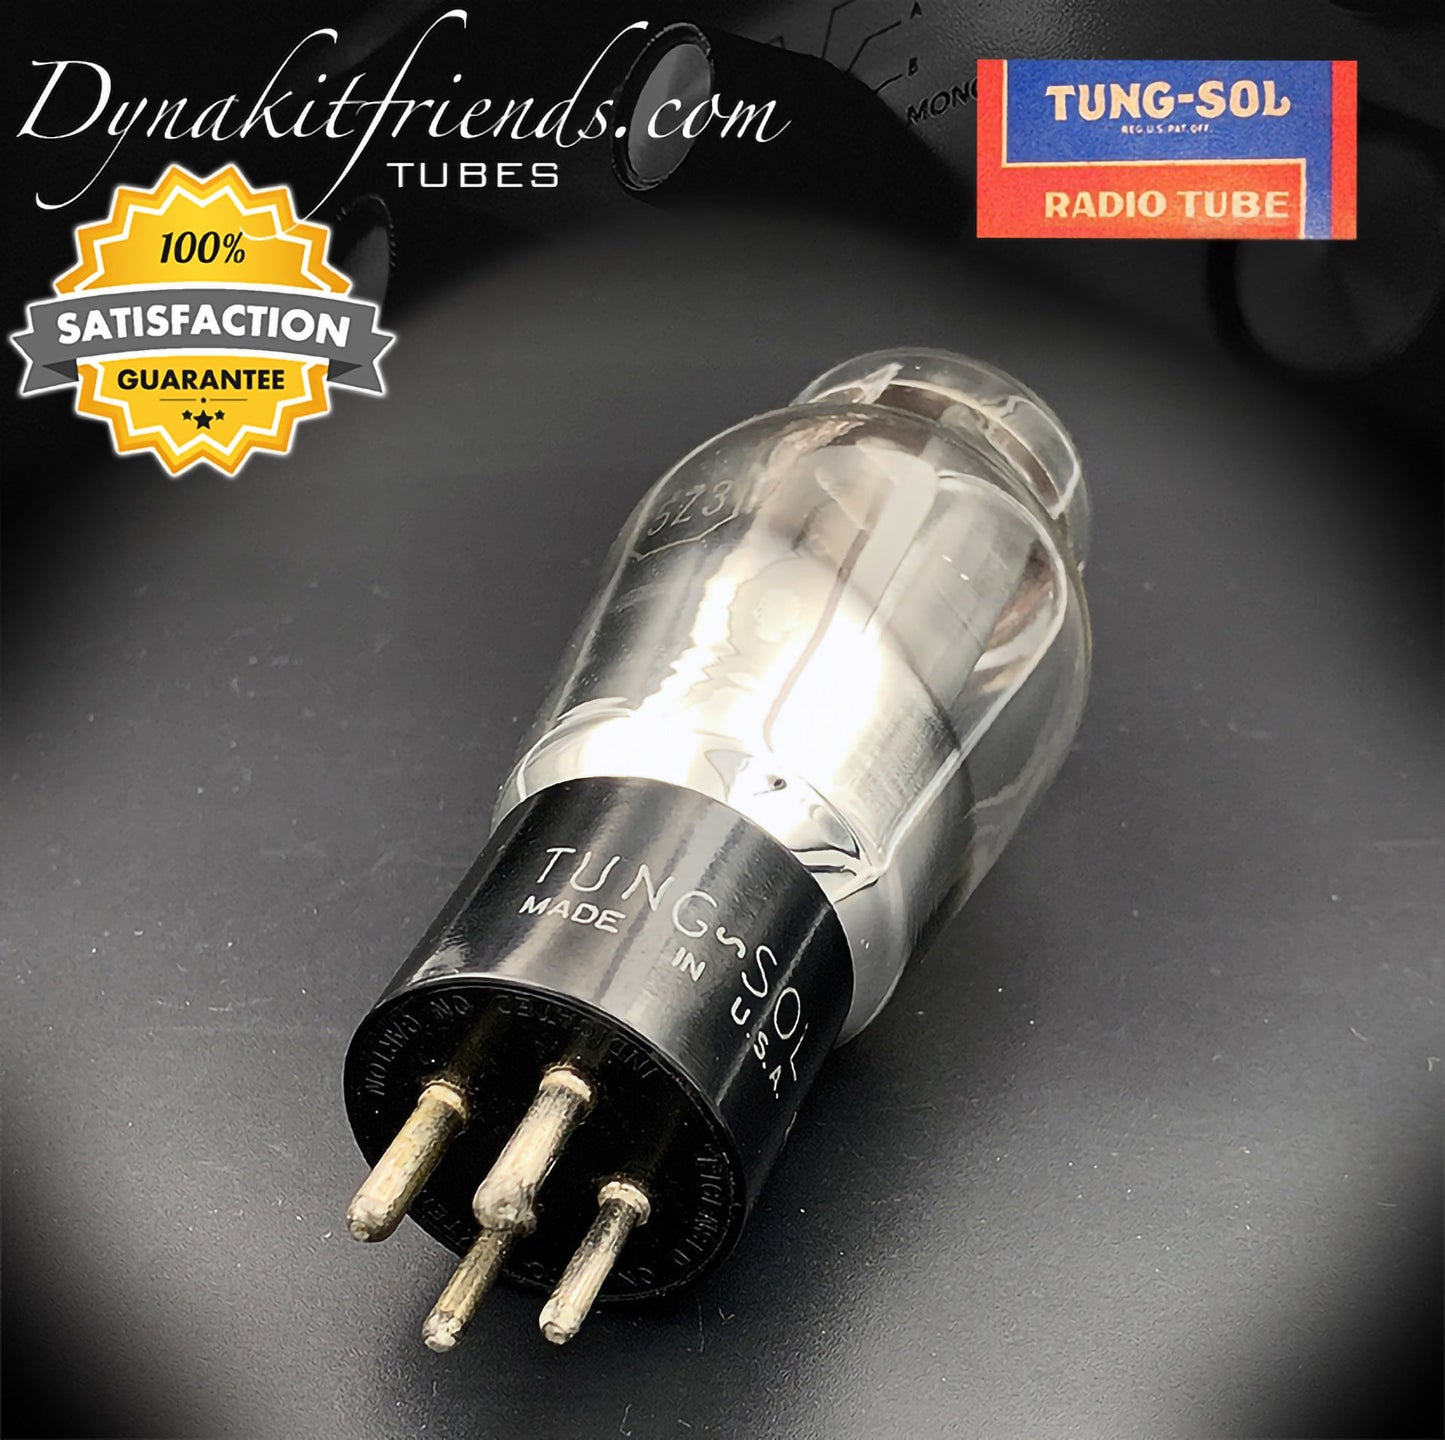 5Z3 ( VT-145 ) TUNG-SOL Black Plates Bottom Foil Getter Hanging Filaments Tube Rectifier Made in USA - Vacuum Tubes Treasures